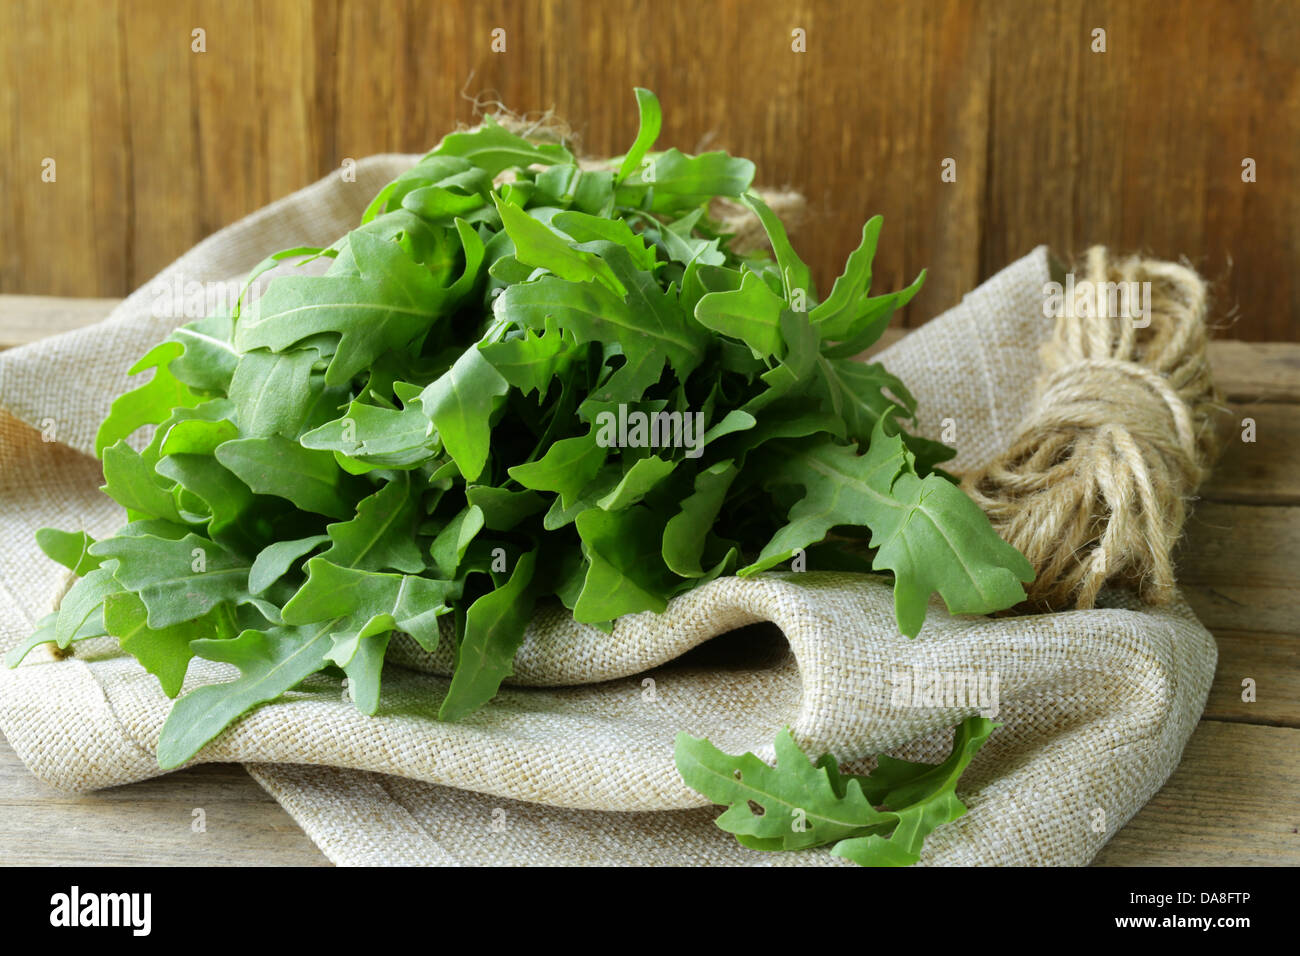 bunch of fresh green arugula on the wooden table Stock Photo